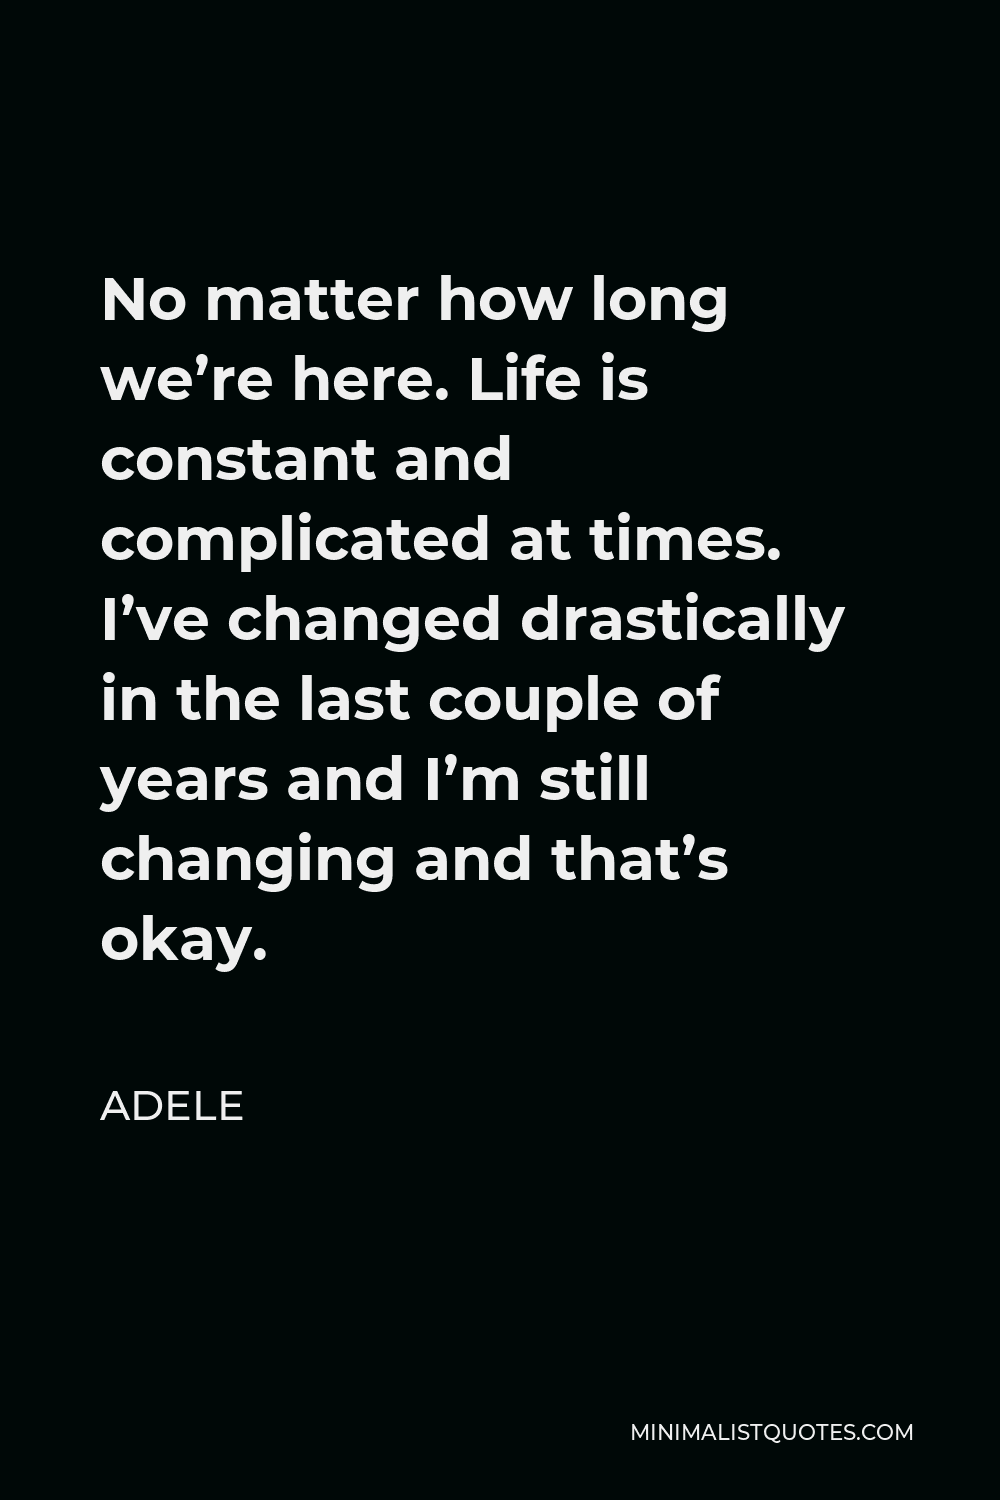 Adele Quote - No matter how long we’re here. Life is constant and complicated at times. I’ve changed drastically in the last couple of years and I’m still changing and that’s okay.